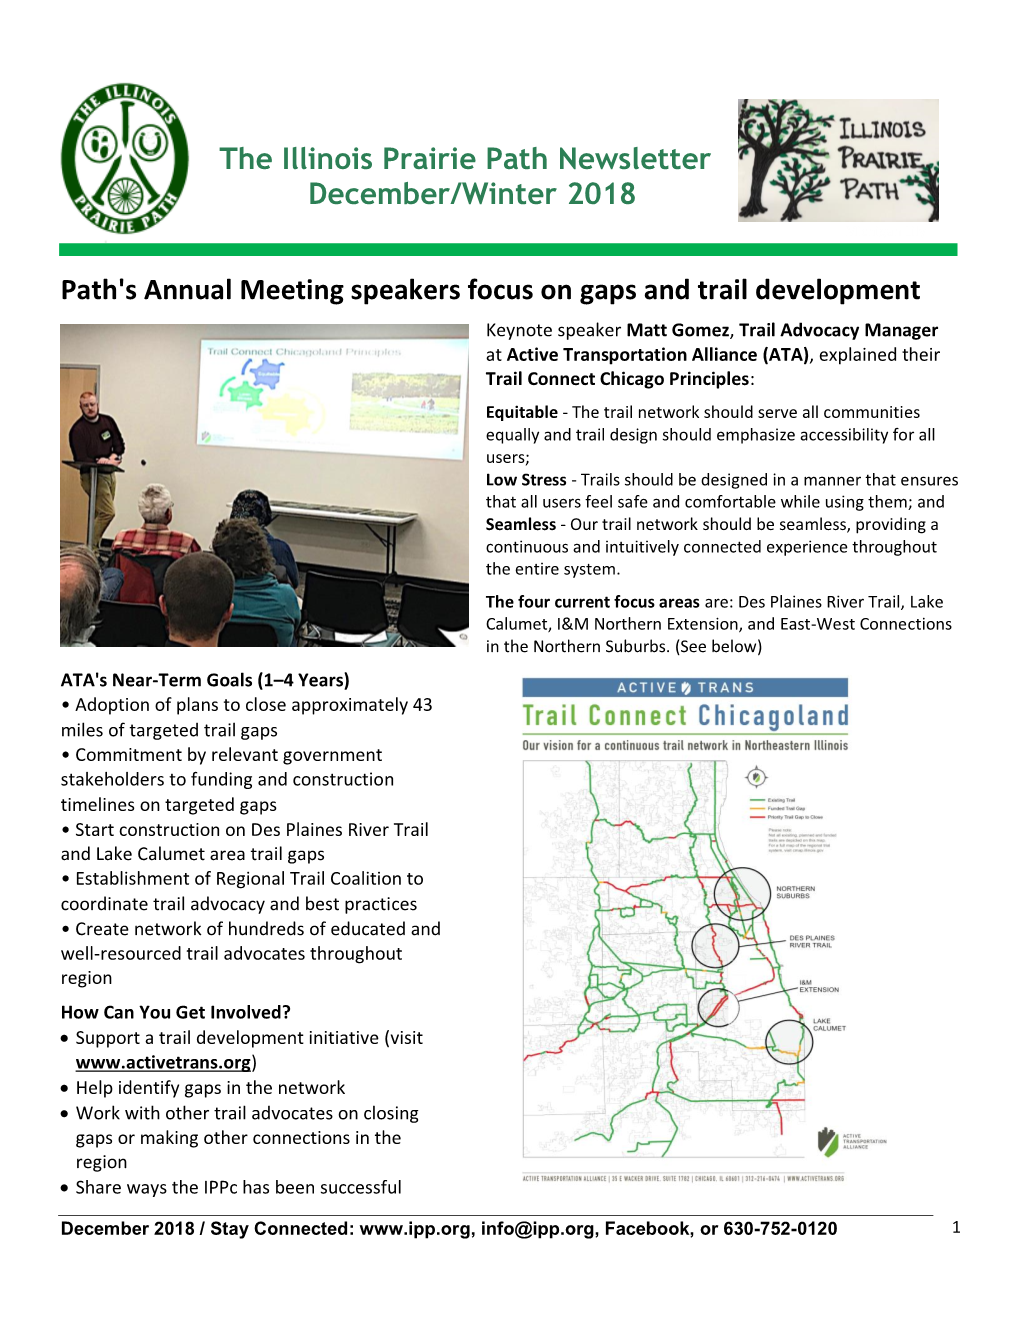 Path's Annual Meeting Speakers Focus on Gaps and Trail Development the Illinois Prairie Path Newsletter December/Winter 2018